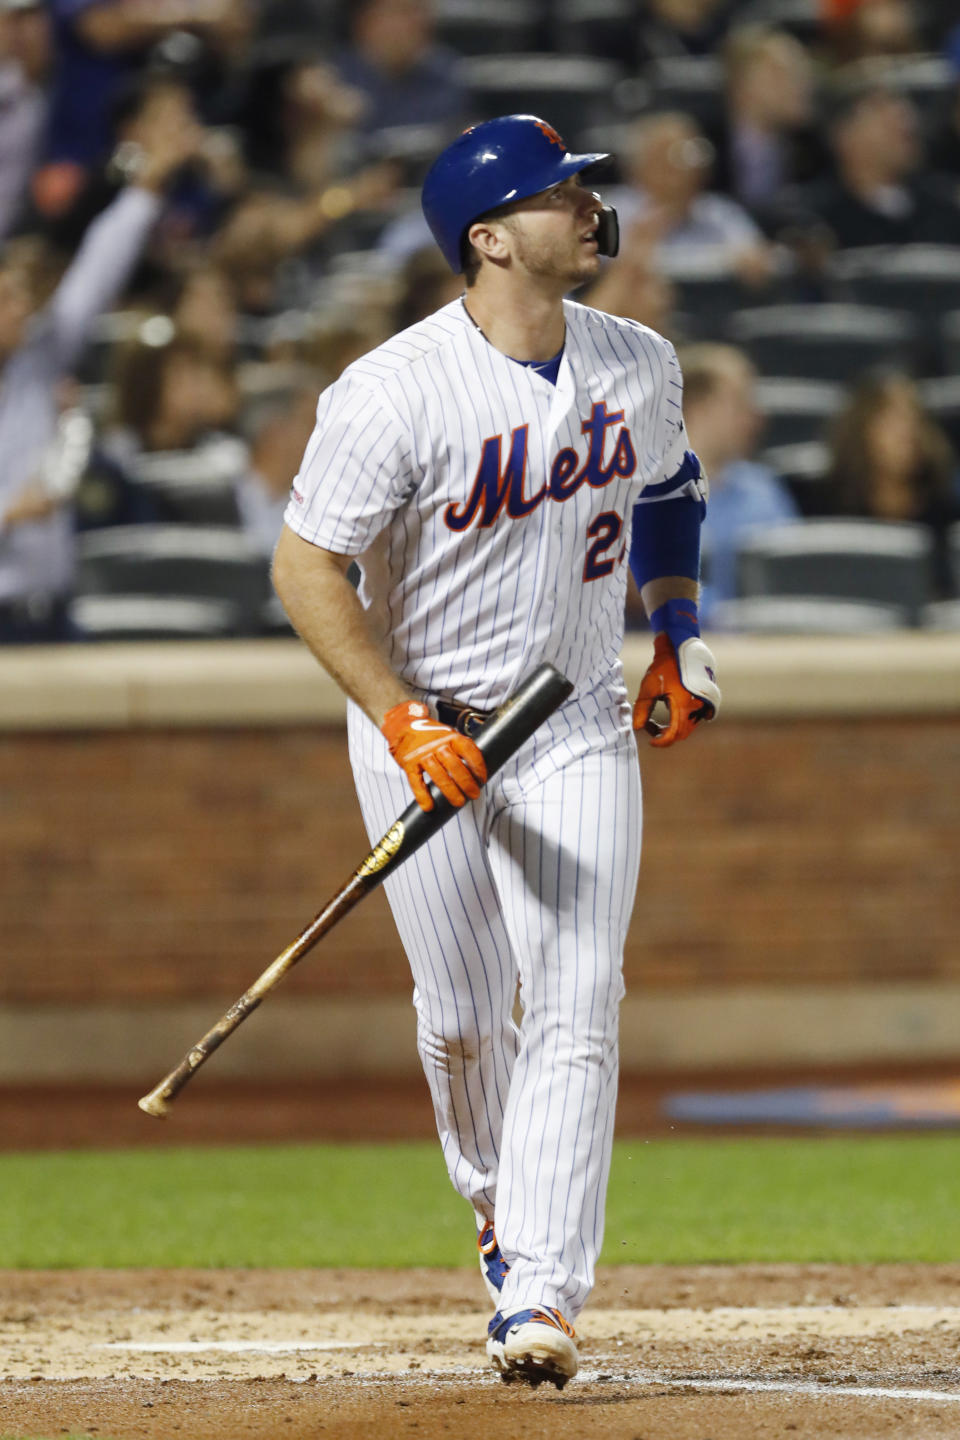 New York Mets' Pete Alonso watches his three-run home run in the second inning of the team's baseball game against the Miami Marlins, Wednesday, Sept. 25, 2019, in New York. (AP Photo/Kathy Willens)